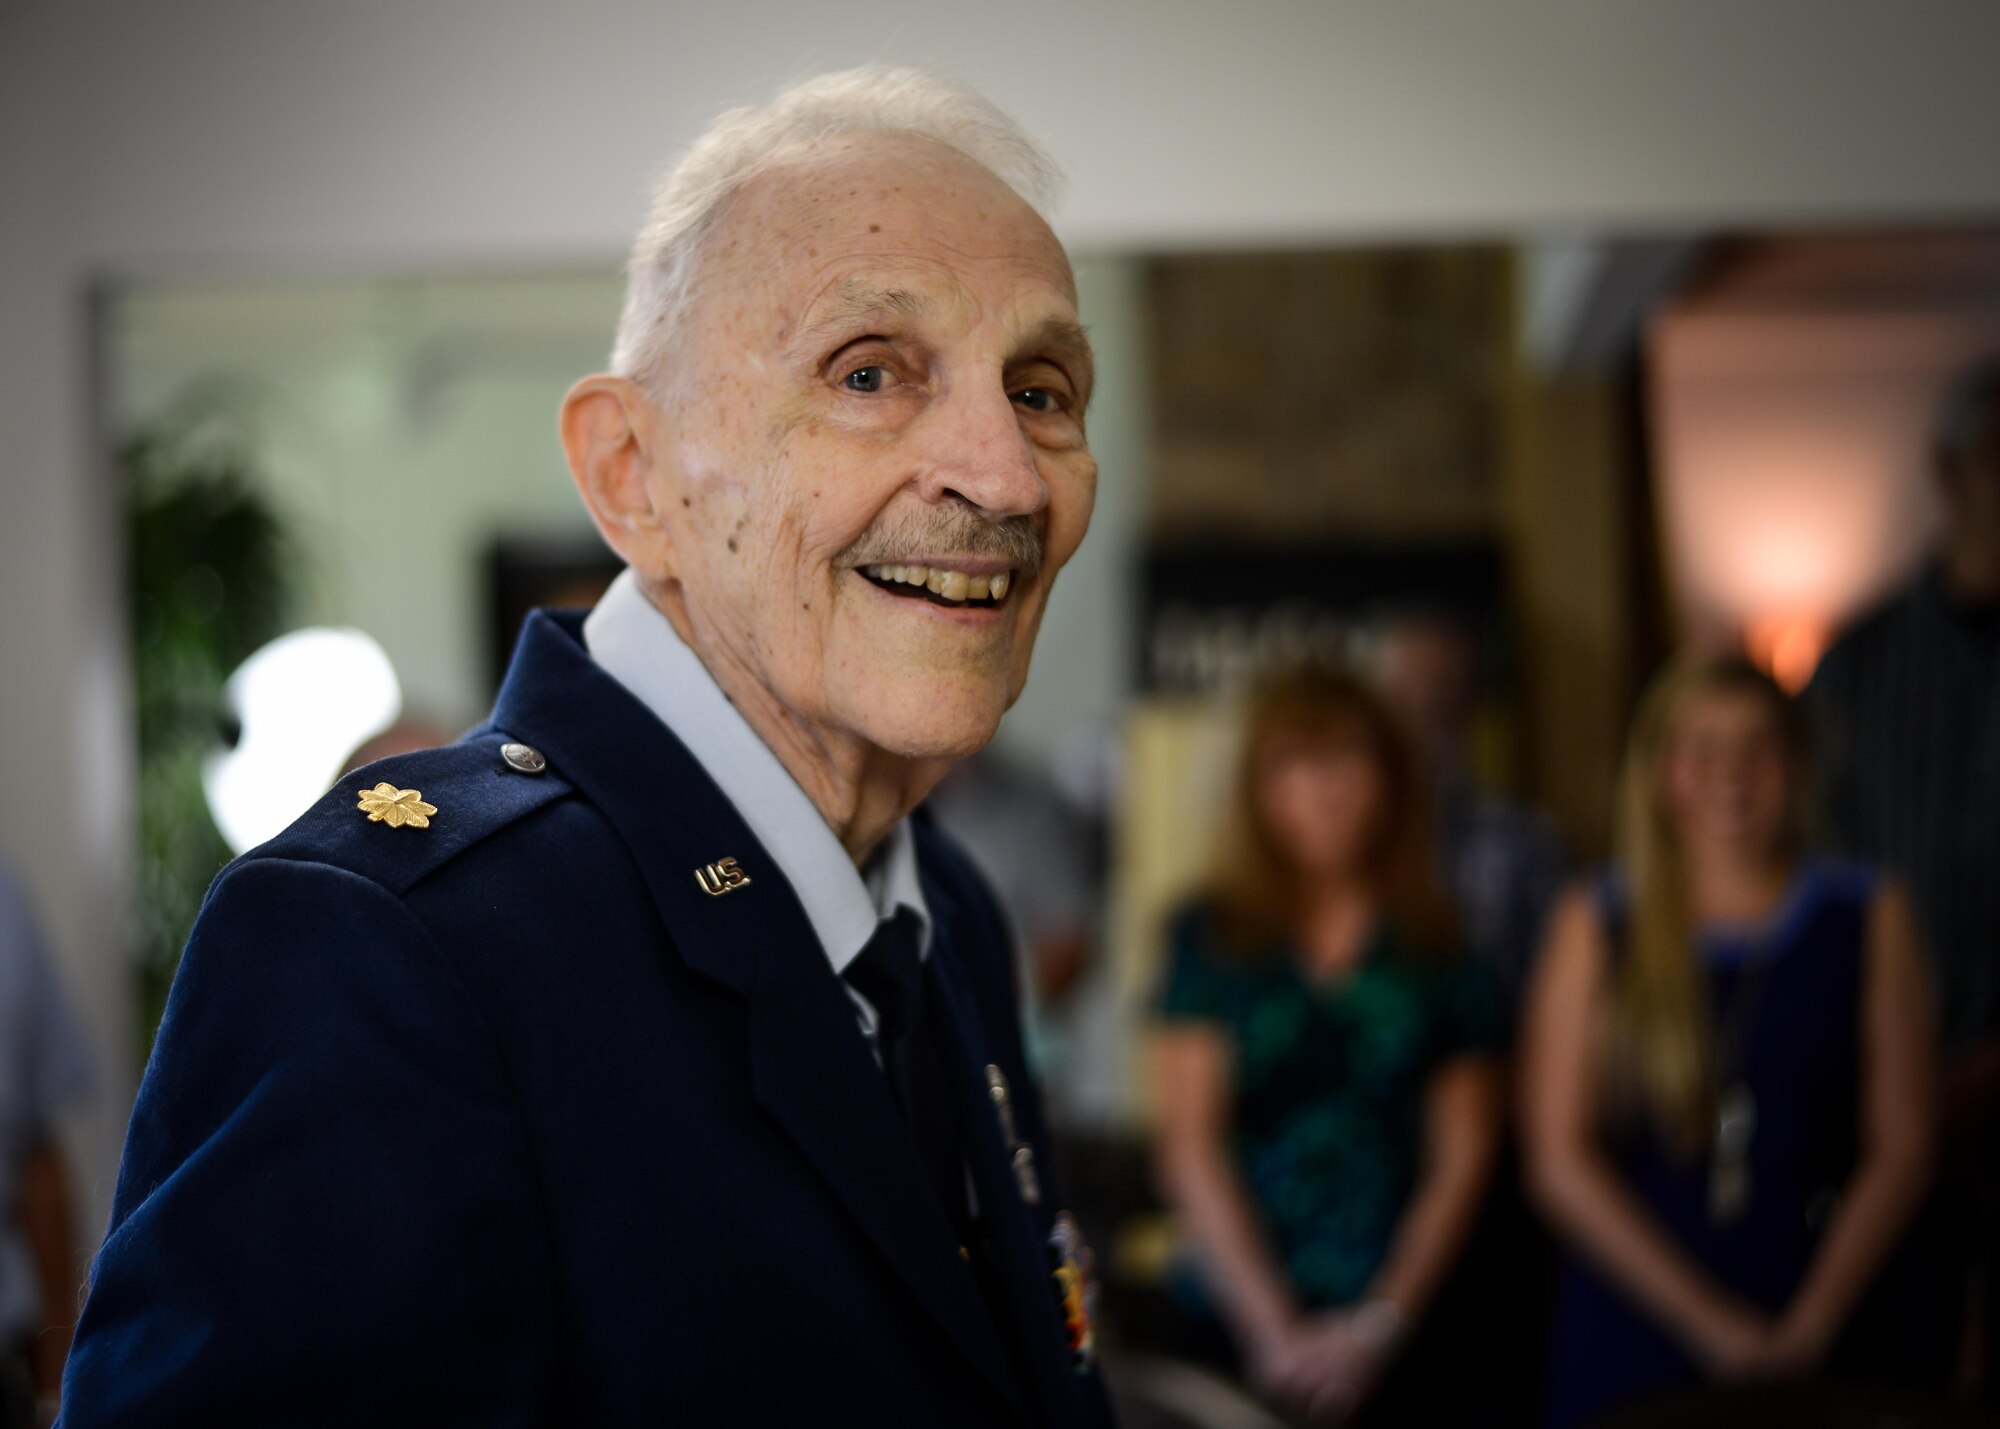 Retired Maj. Joe Campbell poses for a photo during a Distinguished Flying Cross presentation at his residence in Shreveport, La., May 18, 2017. Campbell is a veteran of World War II, the Korean War, and Vietnam and is also rated as both a pilot and navigator, as depicted here by his wearing two distinct sets of wings. (U.S. Air Force photo/Senior Airman Mozer O. Da Cunha)